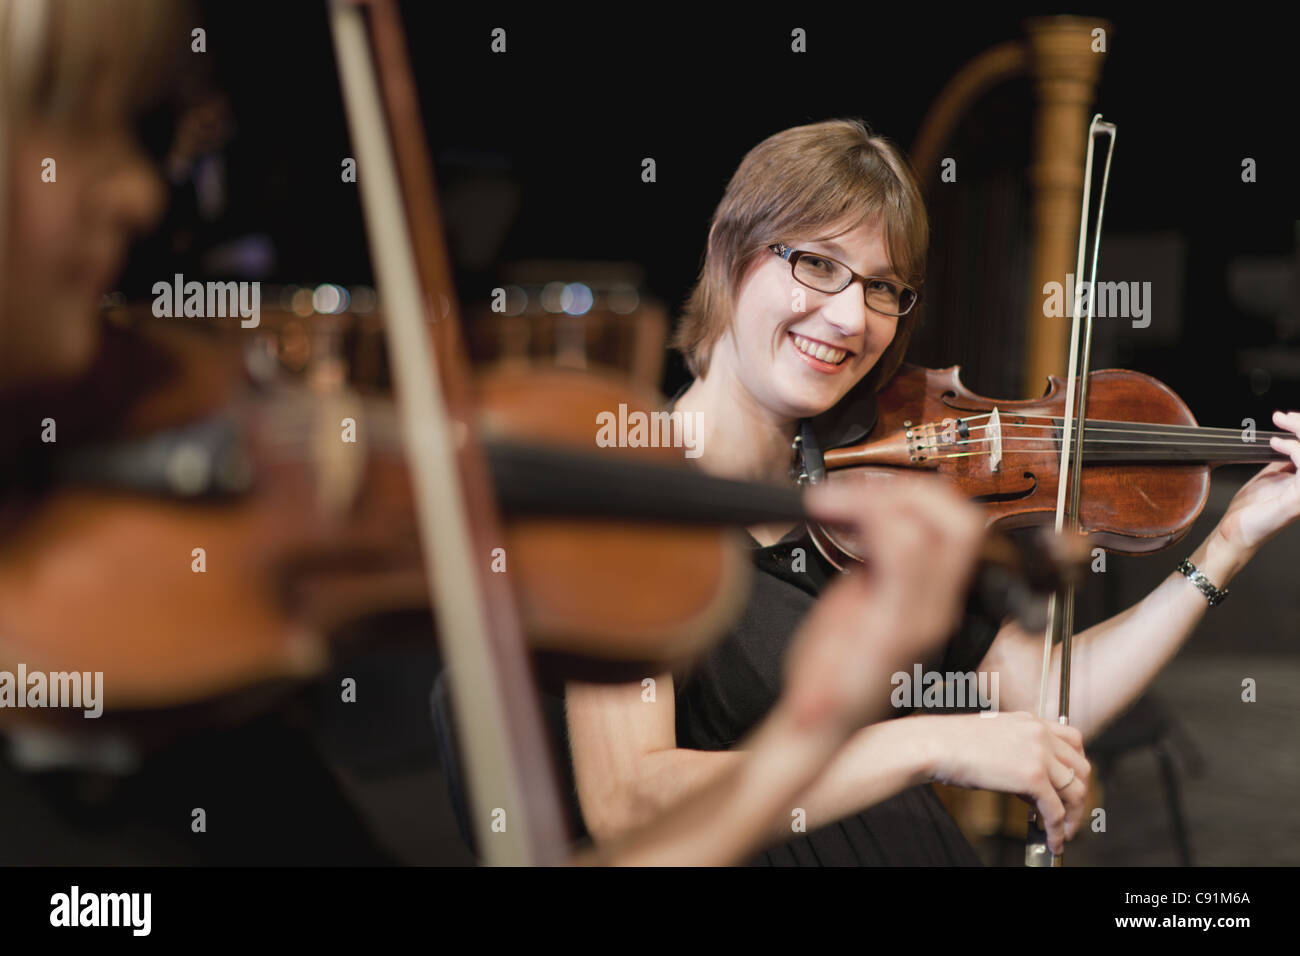 Violin players in orchestra Stock Photo